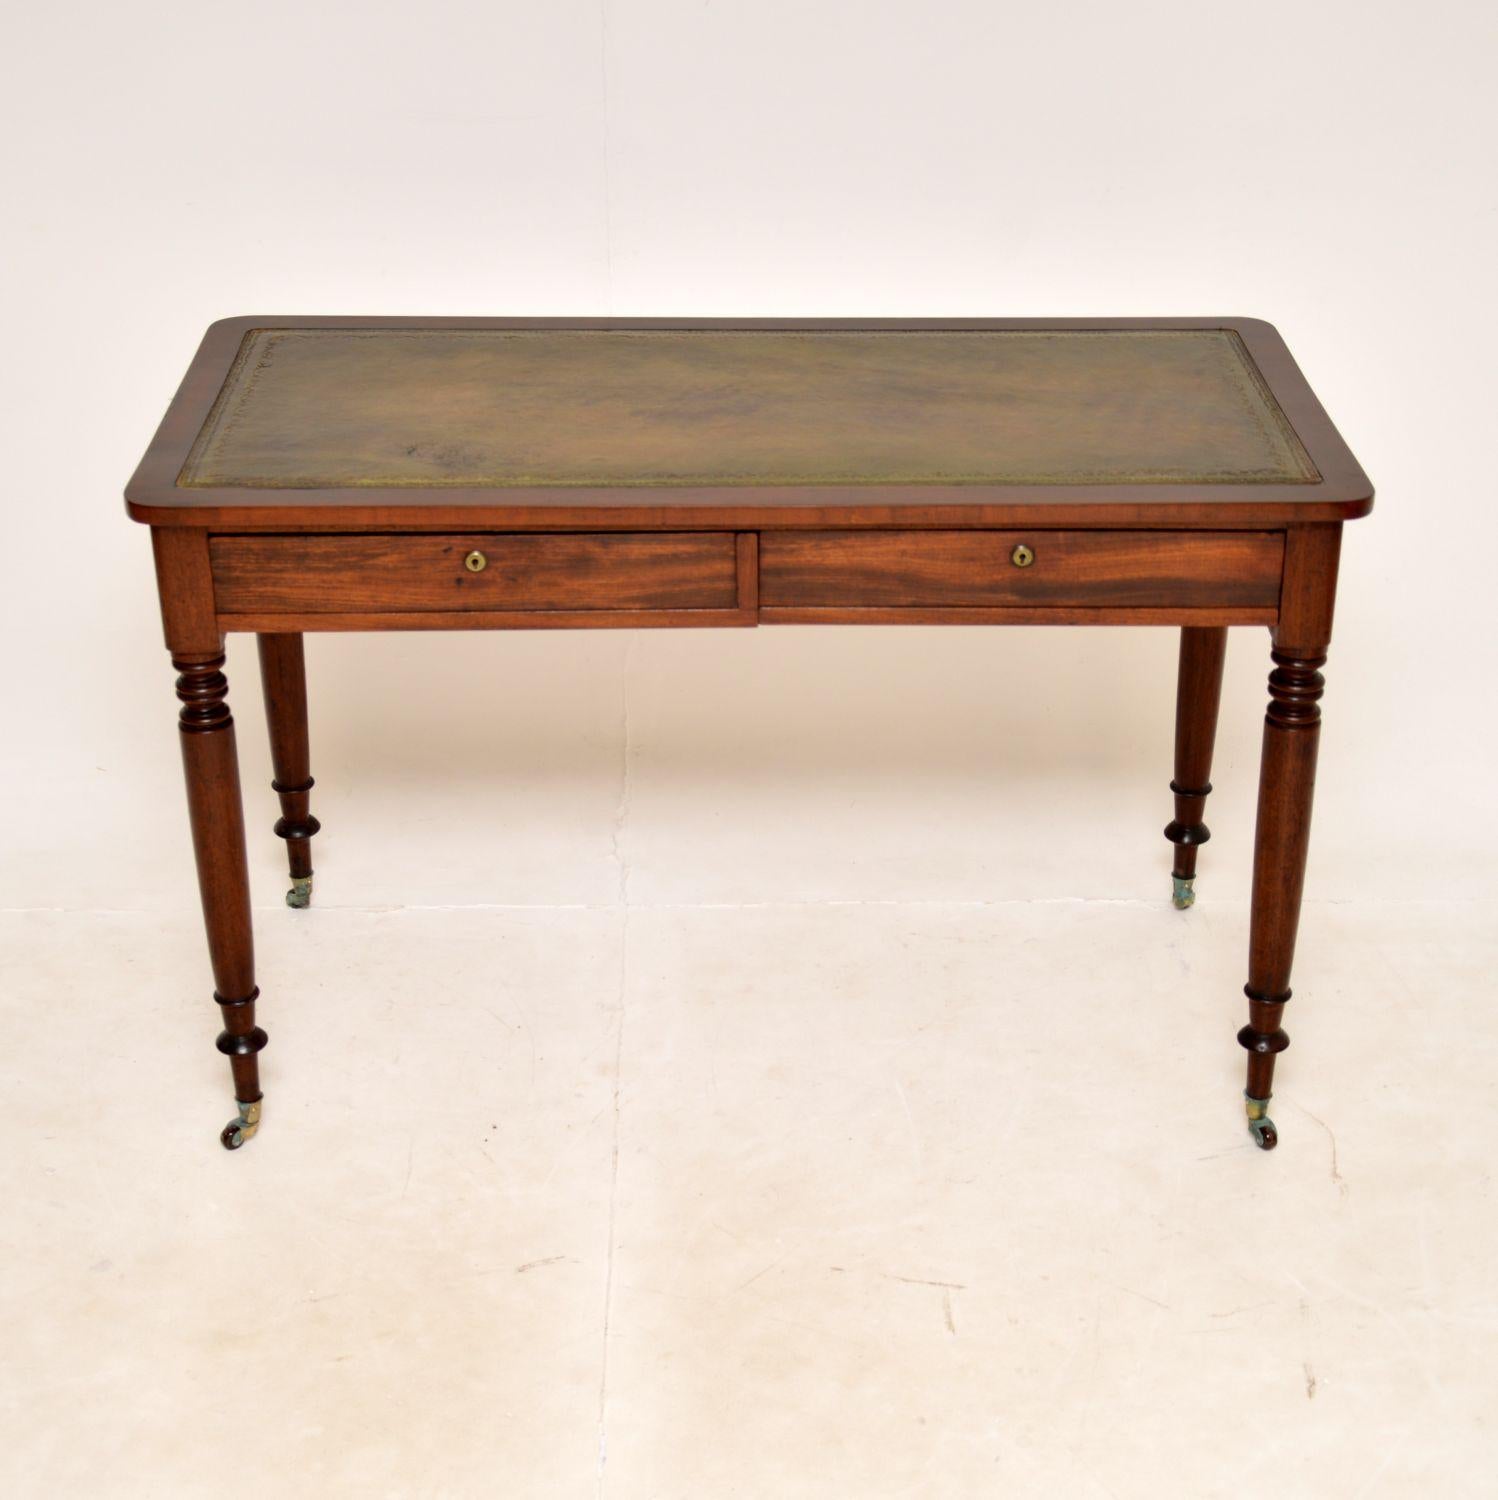 A very smart and well made antique writing table / desk. This was made in England, it dates from the 1840-1850 period.

It is of lovely quality and is a very useful size. The inset leather top is hand coloured with tooled edges, this has a nicely